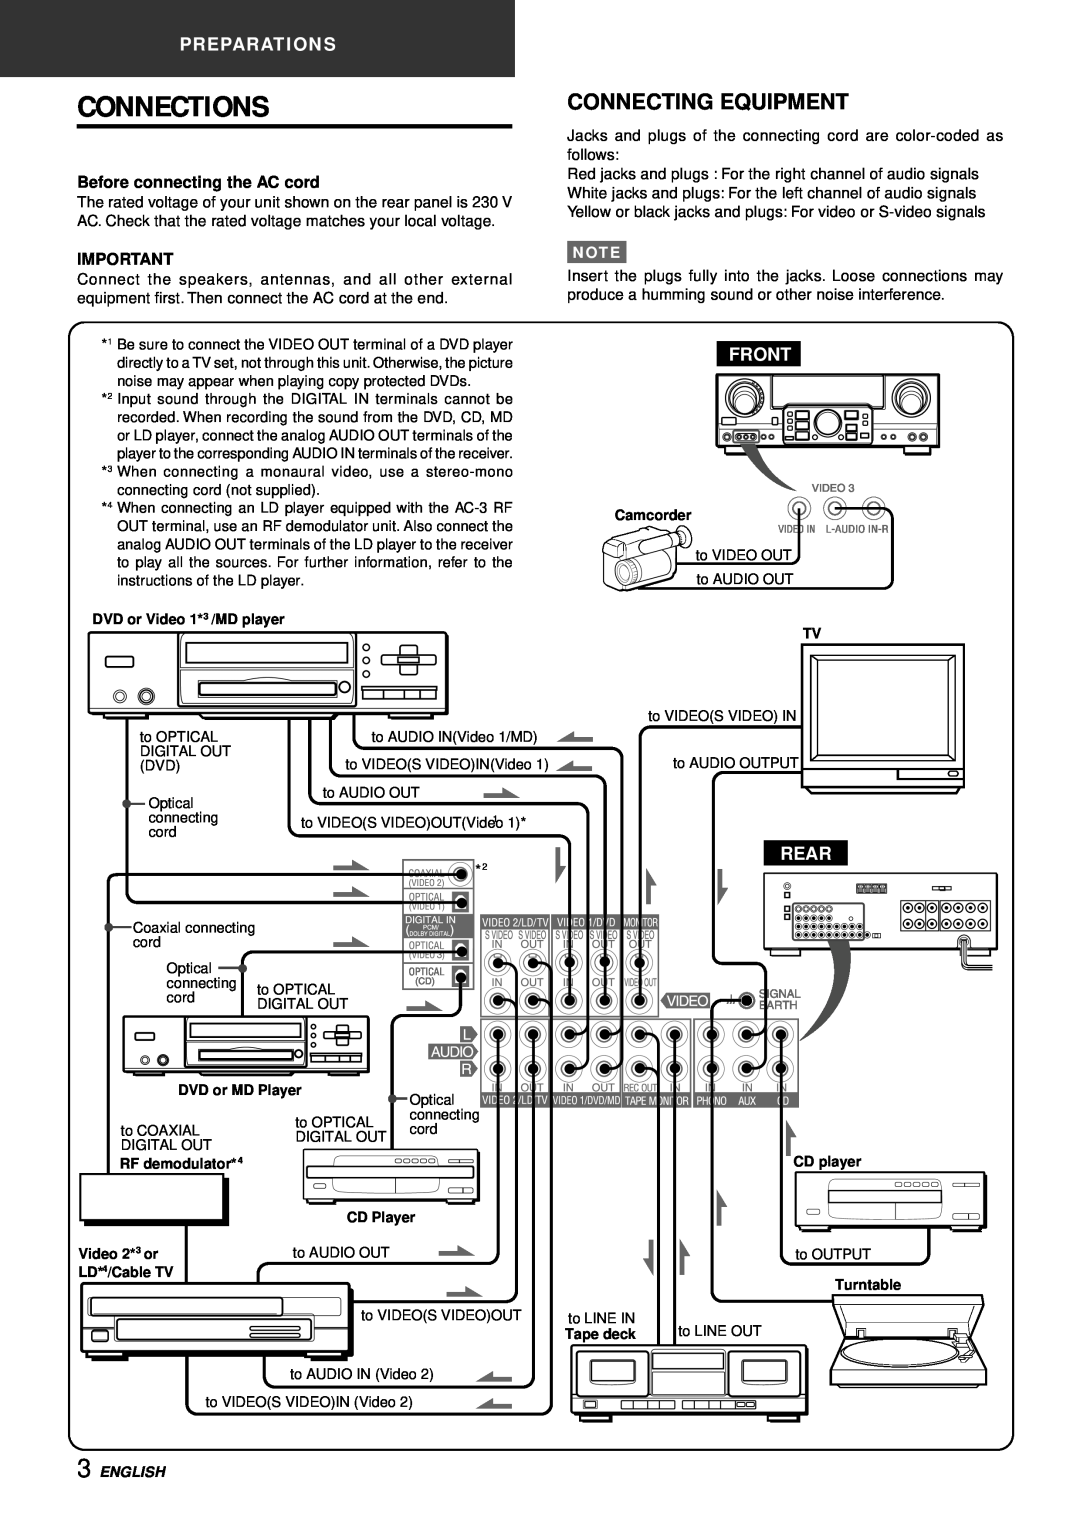 Aiwa AV-D97 manual Connections, Connecting Equipment 